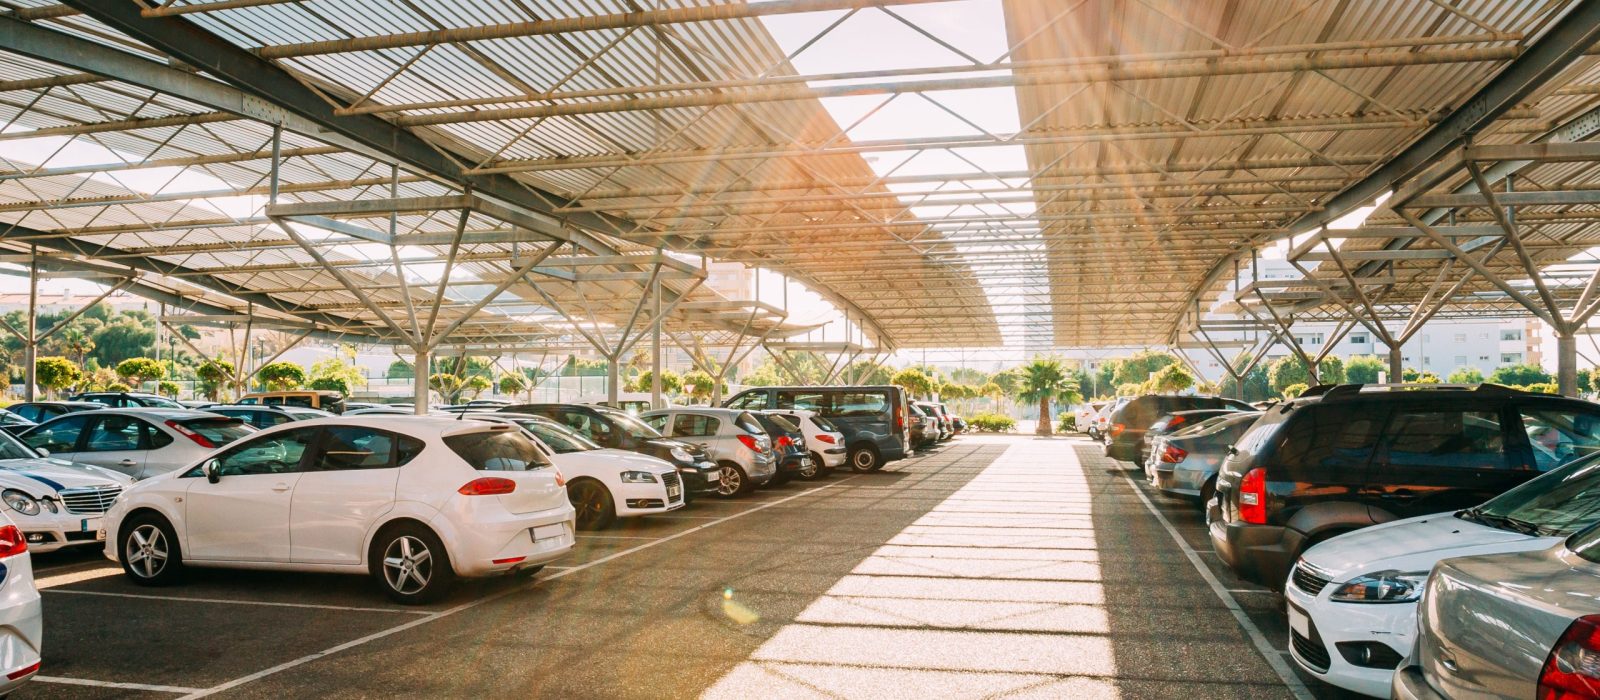 Cars on a covered parking lot in sunny summer day